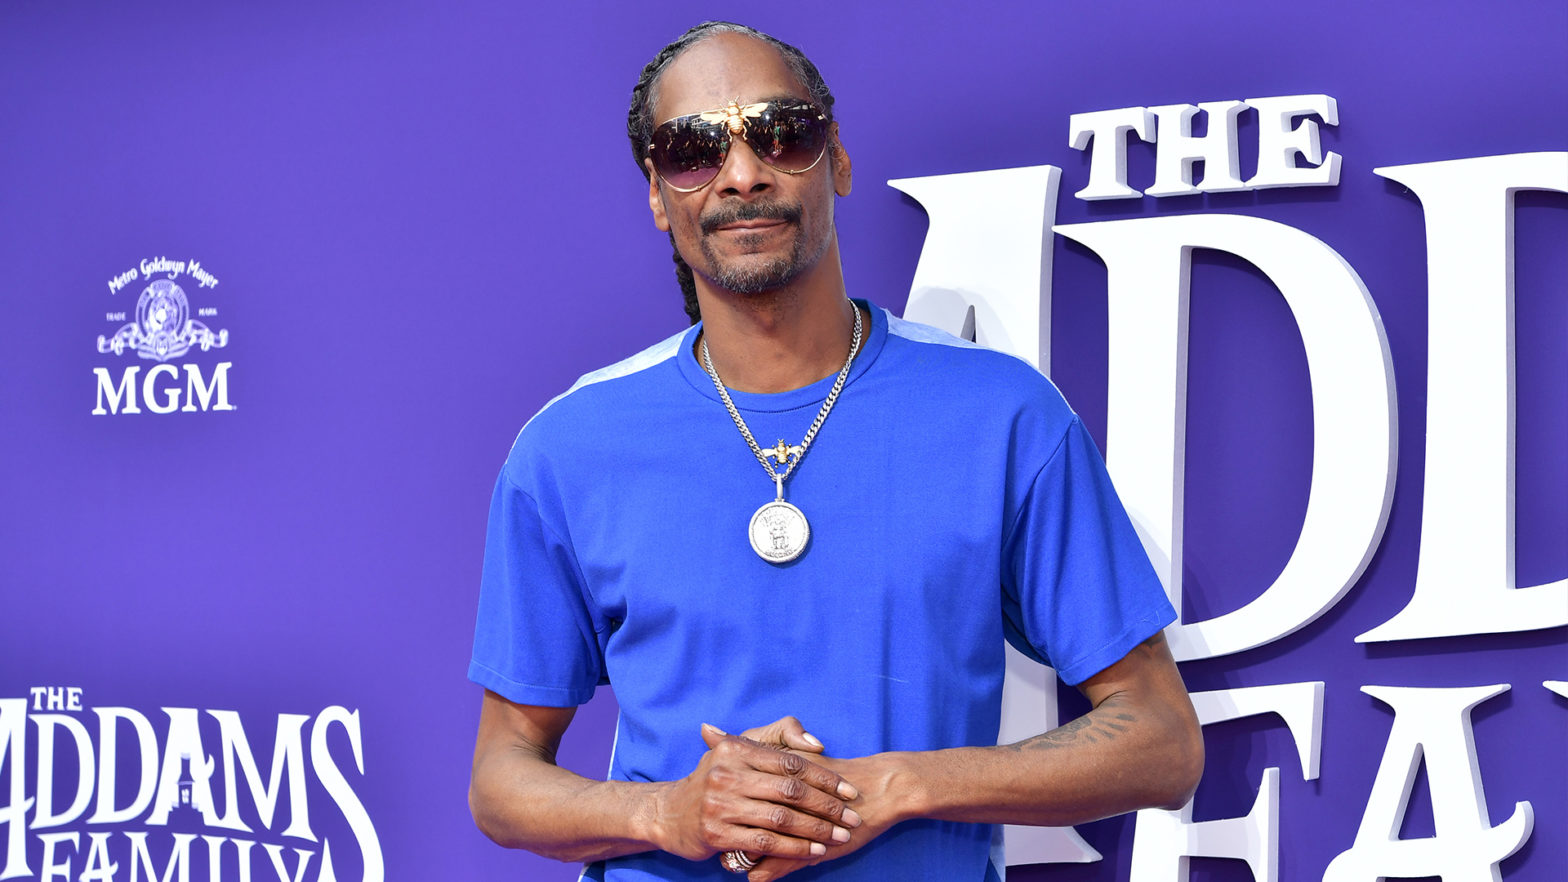 Someone Just Paid $450K To Live Next To Snoop Dogg...In A Virtual World